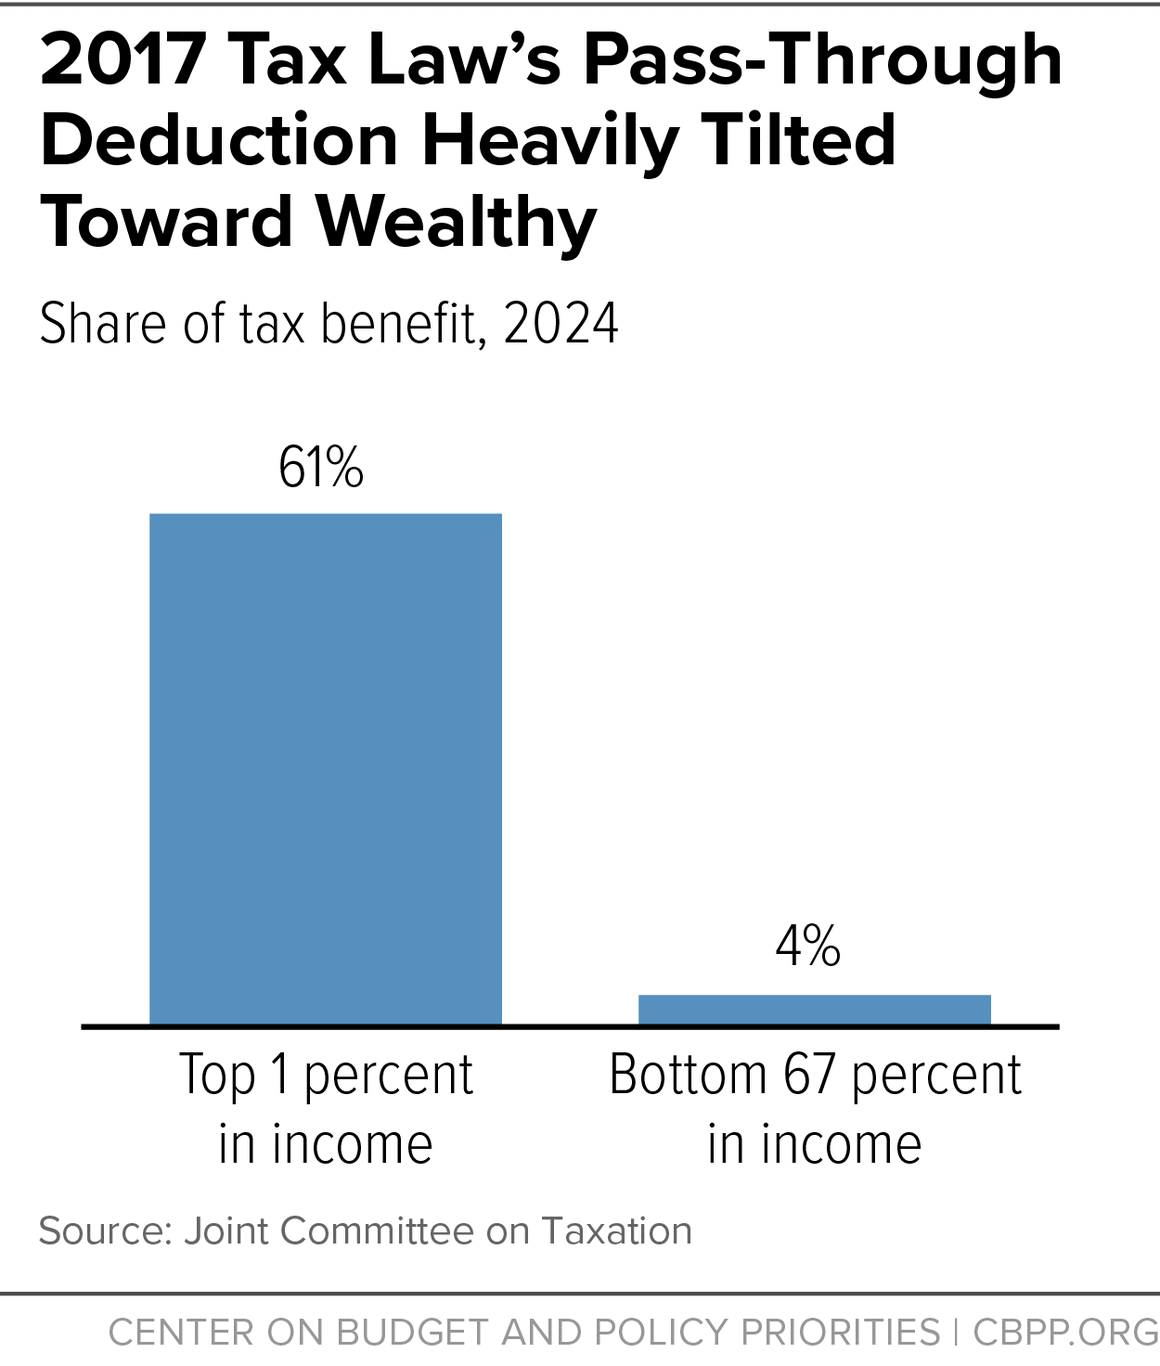 2017 Tax Law's Pass-Through Deduction Heavily Tilted Toward Wealthy